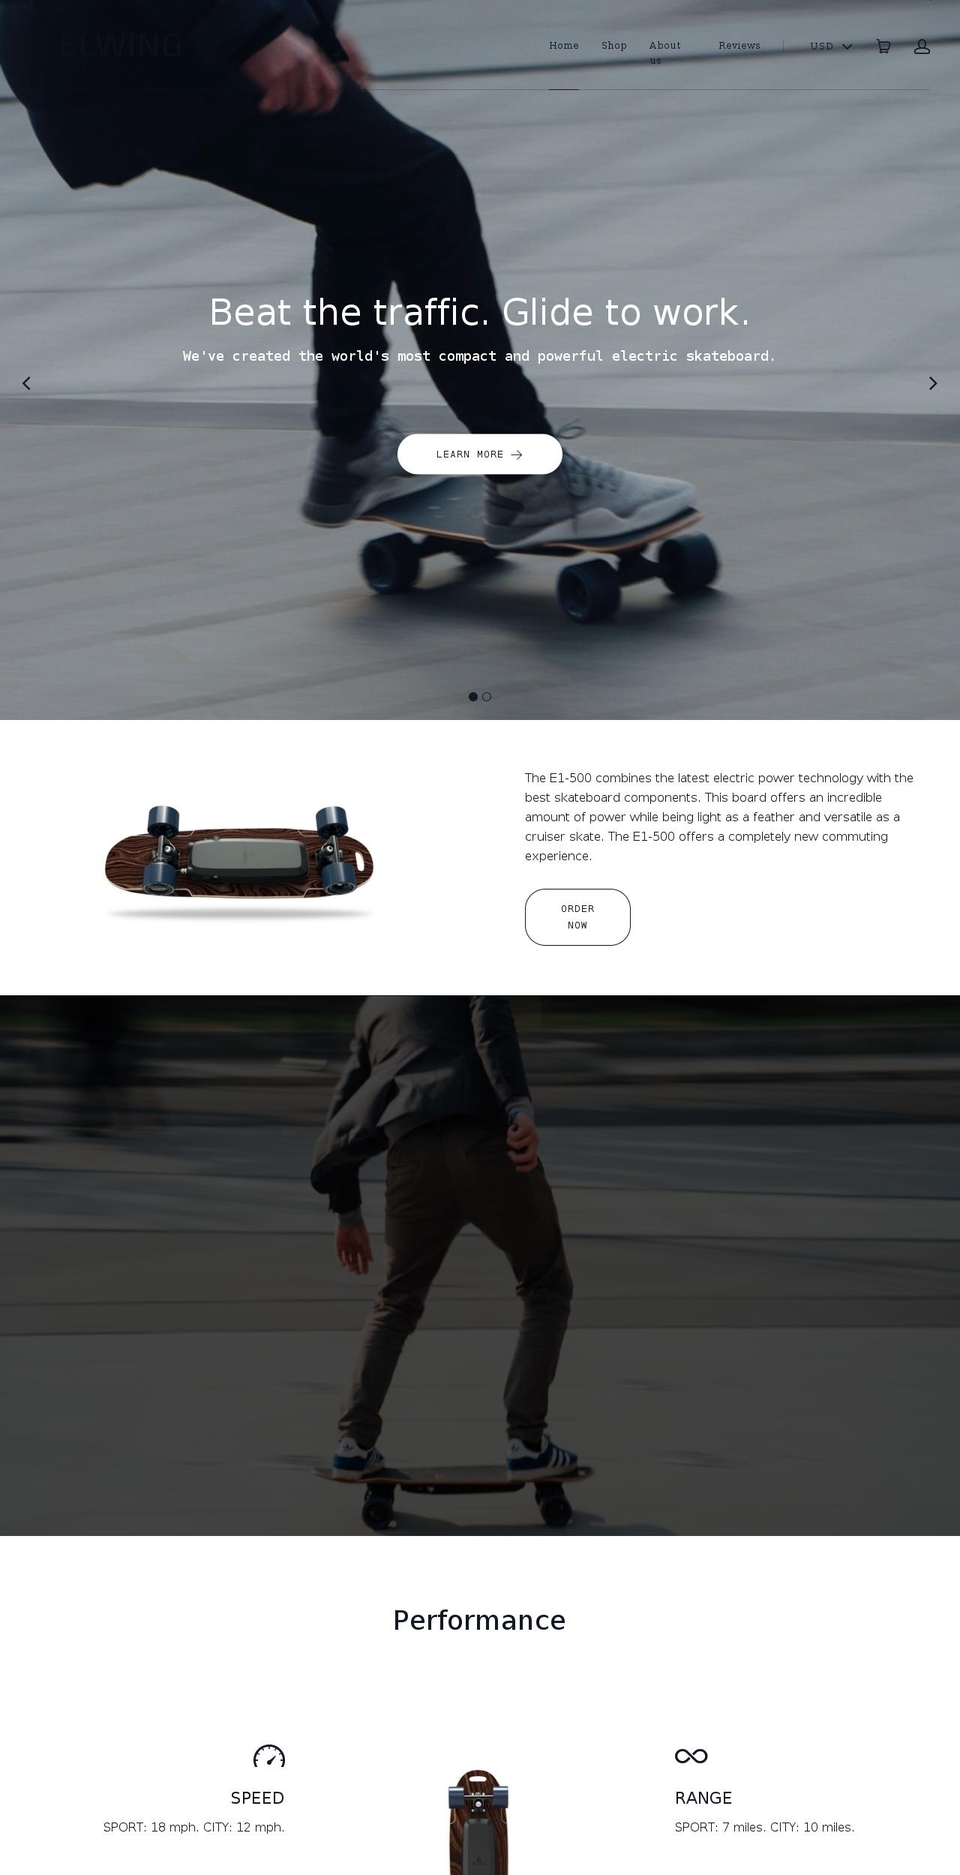 Motion Shopify theme site example elwingboards.com